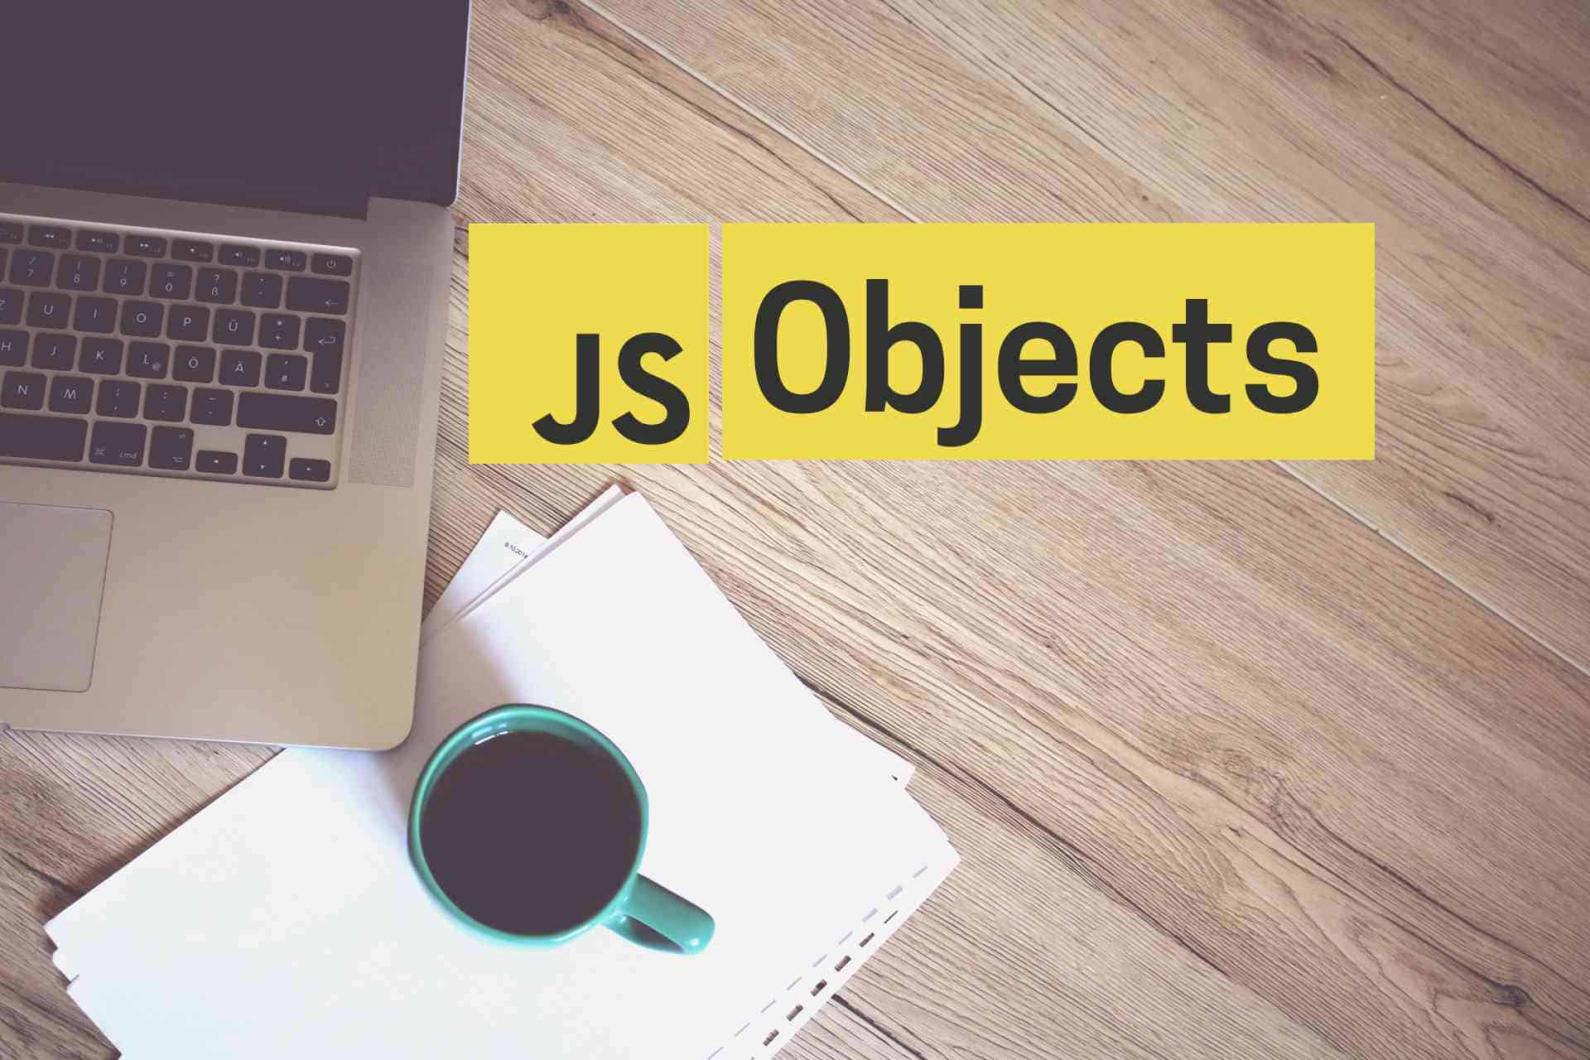 How Can I Check if a JavaScript Object is Empty?